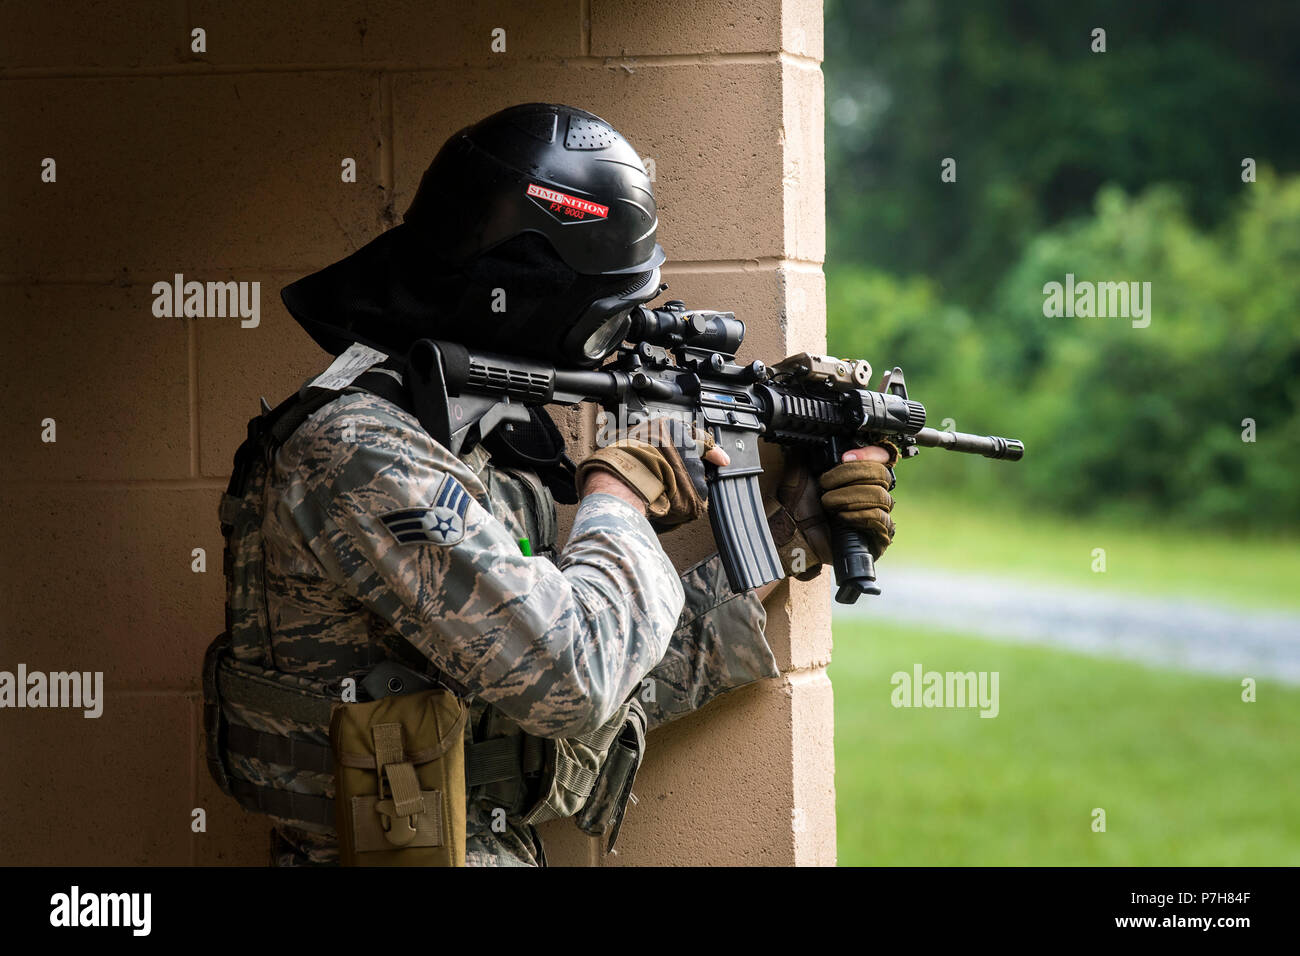 An Airman from the 23d Security Forces Squadron (SFS) fires an M4 carbine during a Force on Force training scenario, June 29, 2018, at Moody Air Force Base, Ga. This training was held to ensure SFS Airmen are proficient in various tactics and procedures such as: building clear out, team movements, hostage rescue and properly applying cover fire. The scenario required Airmen to maneuver through multiple buildings to rescue a simulated victim guarded by opposing forces. (U.S. Air Force photo Airman 1st Class Eugene Oliver) Stock Photo